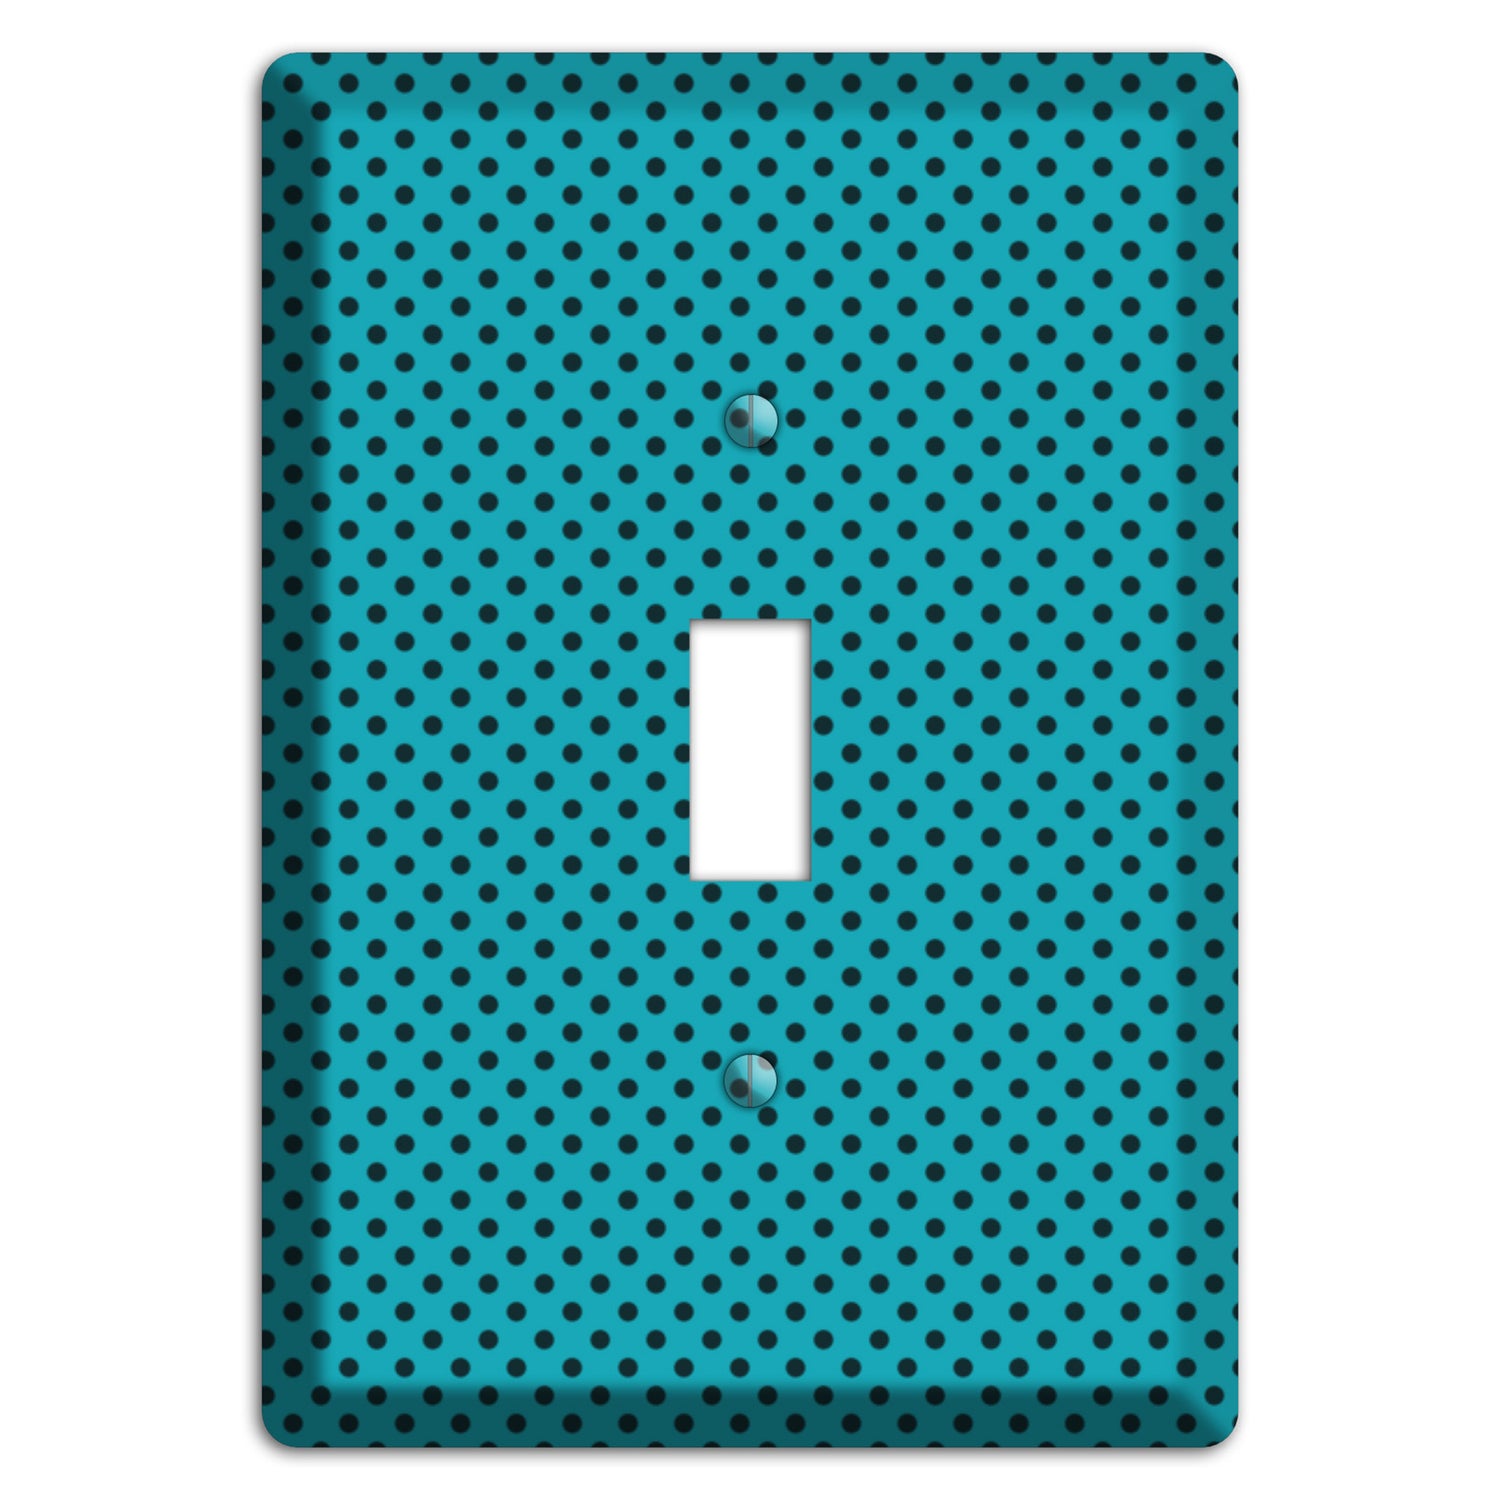 Turquoise with Polka Dots Cover Plates